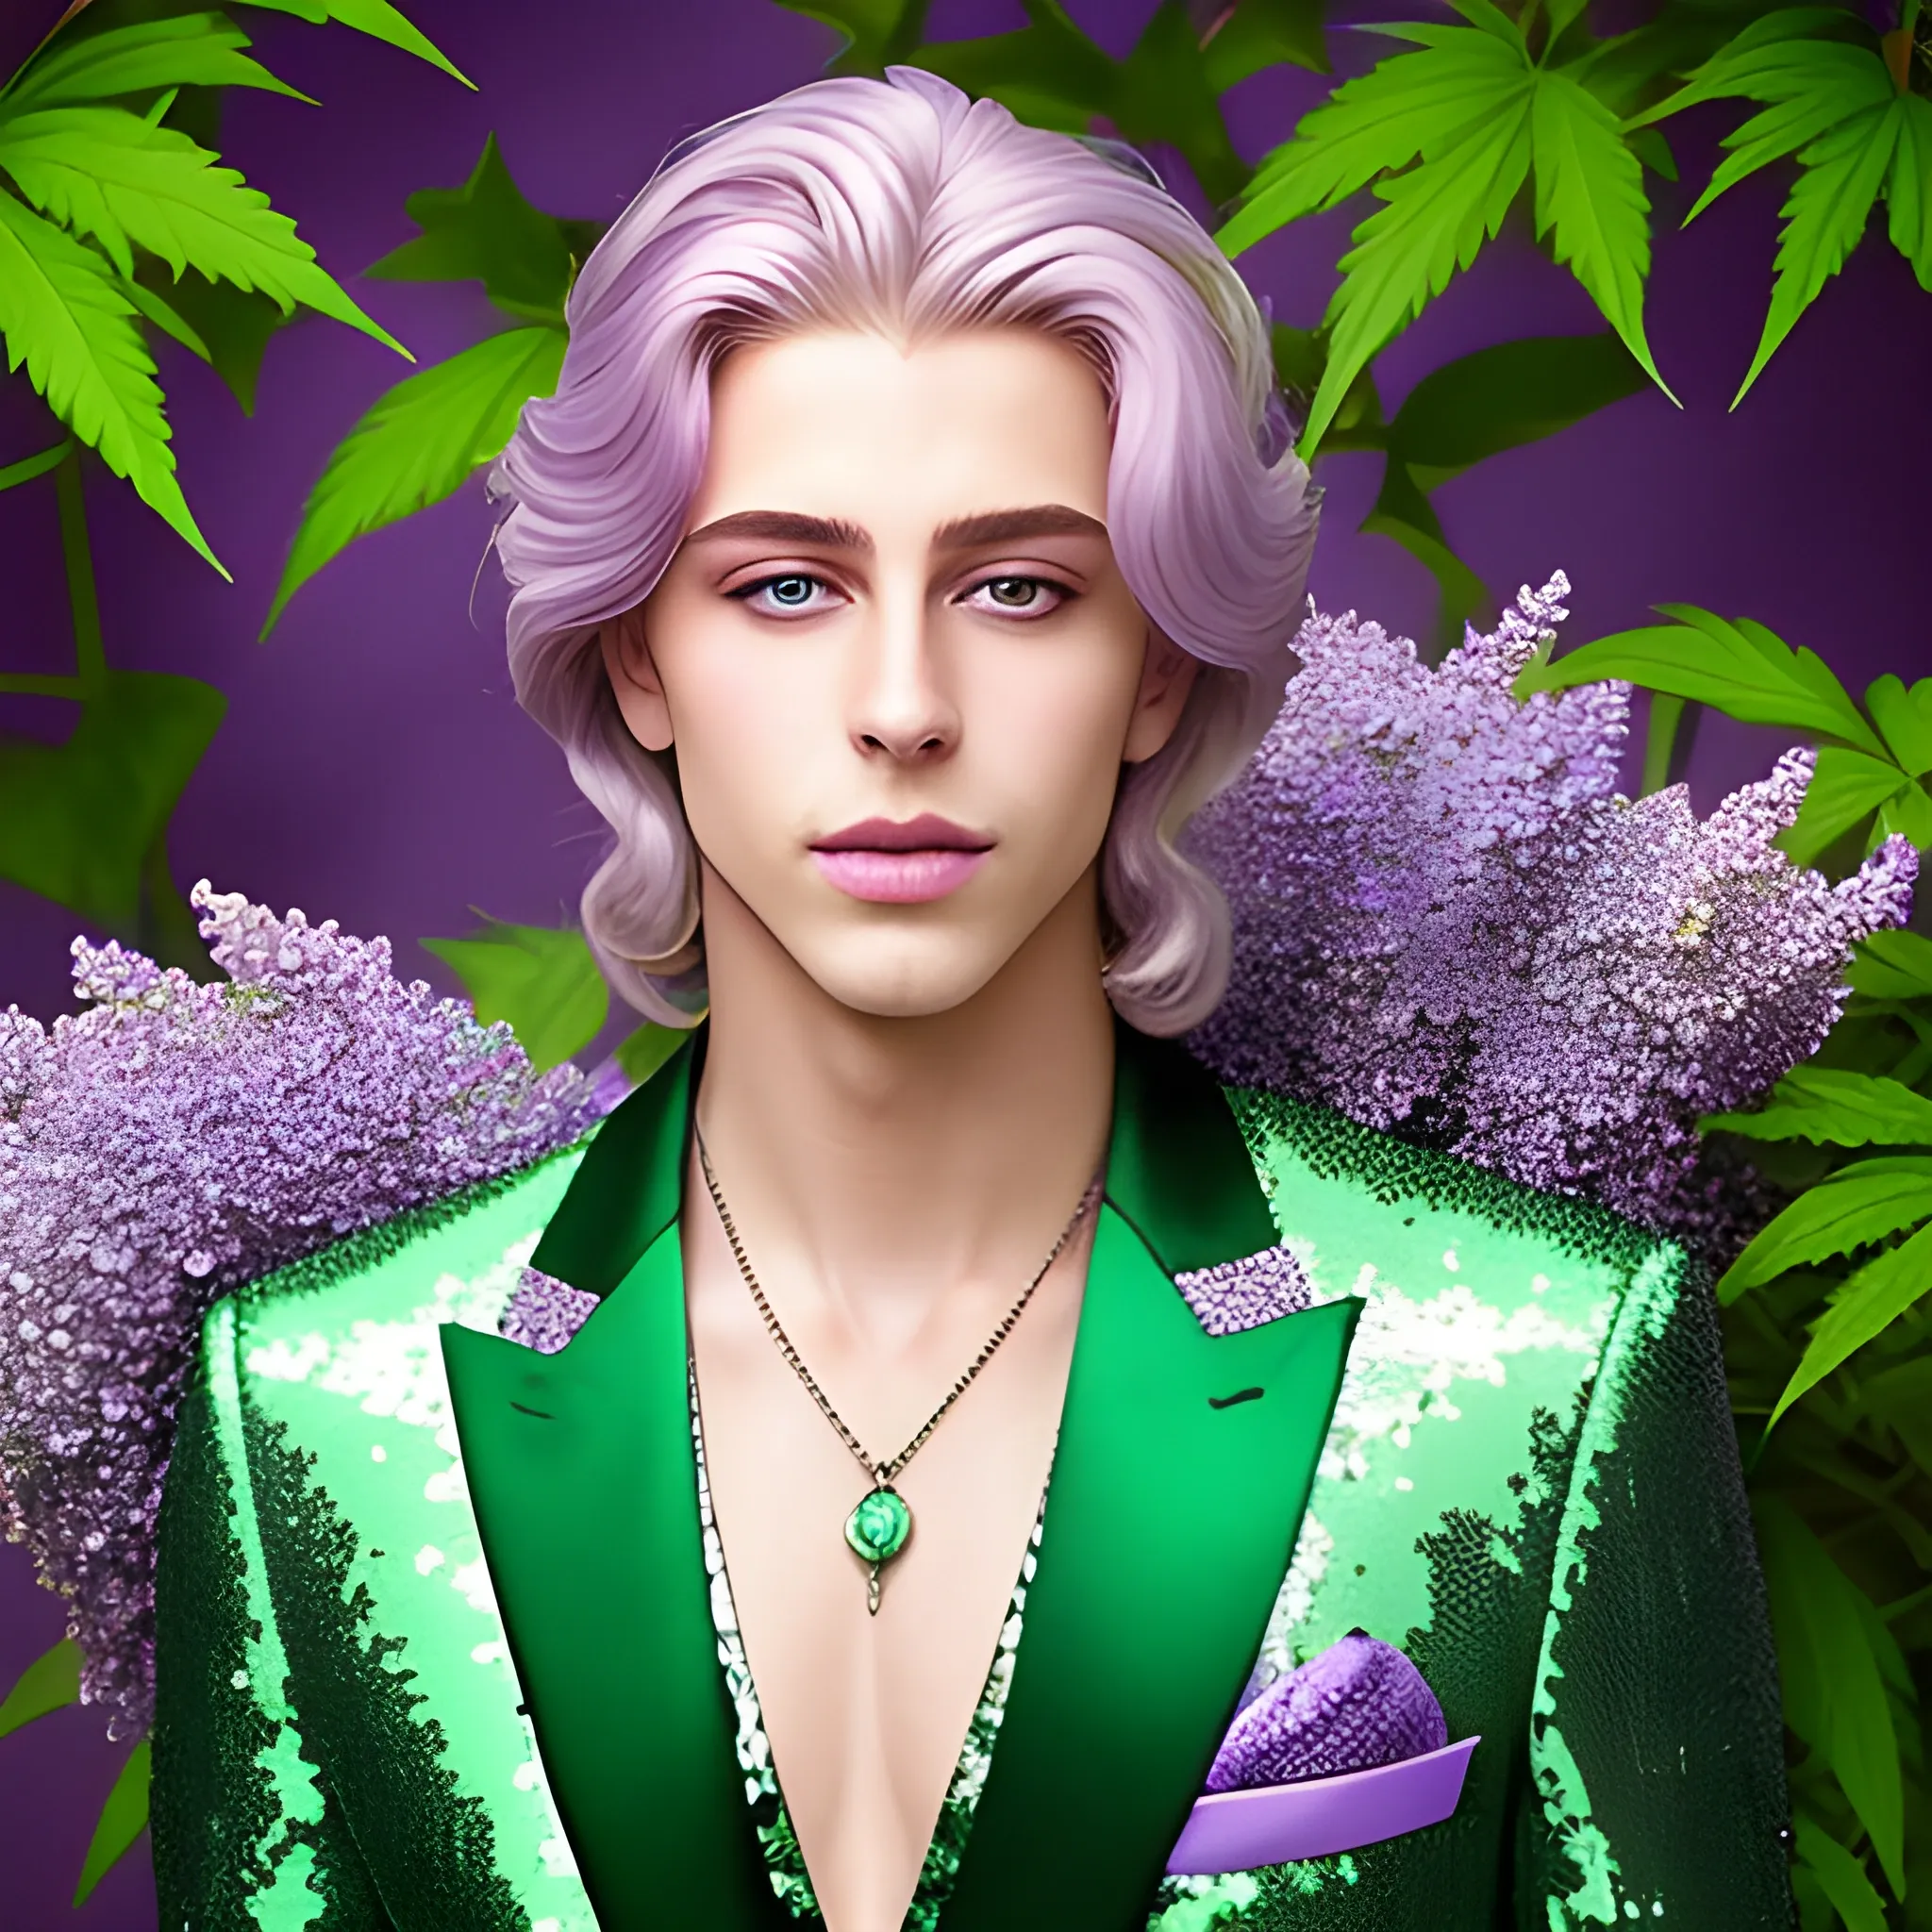 Lilac Prince, beautiful man wears a green sequined suit. he has long, sleek blond hair, and sits in front of weed bushes. His features are symmetrical, handsome, and anatomically correct. he wears amethyst jewelry. Lips are soft, in a slight smile.